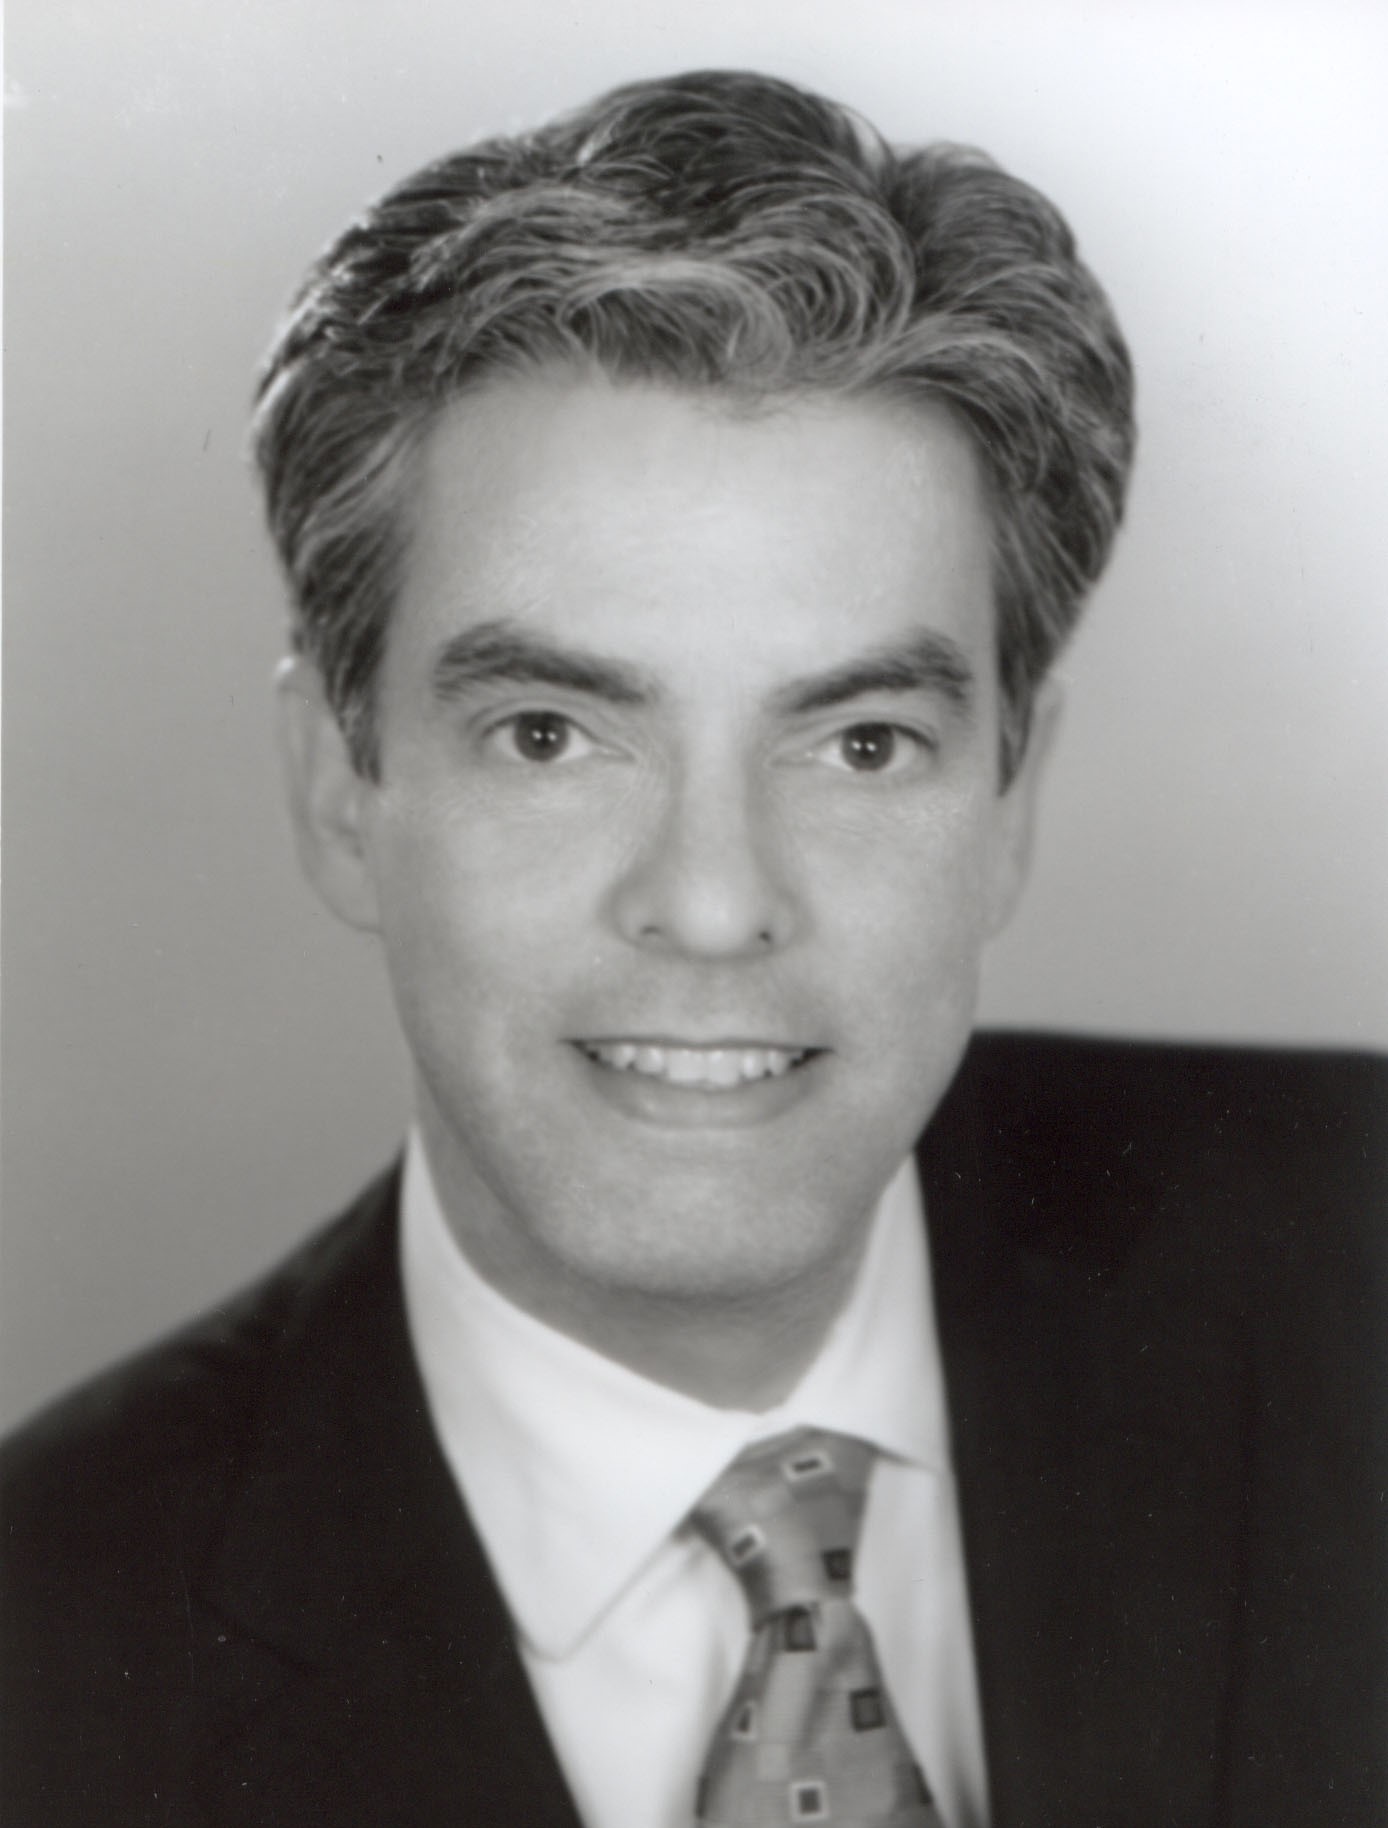 David Middleton - Chair of Finance Committee, Member of the Board of Directors